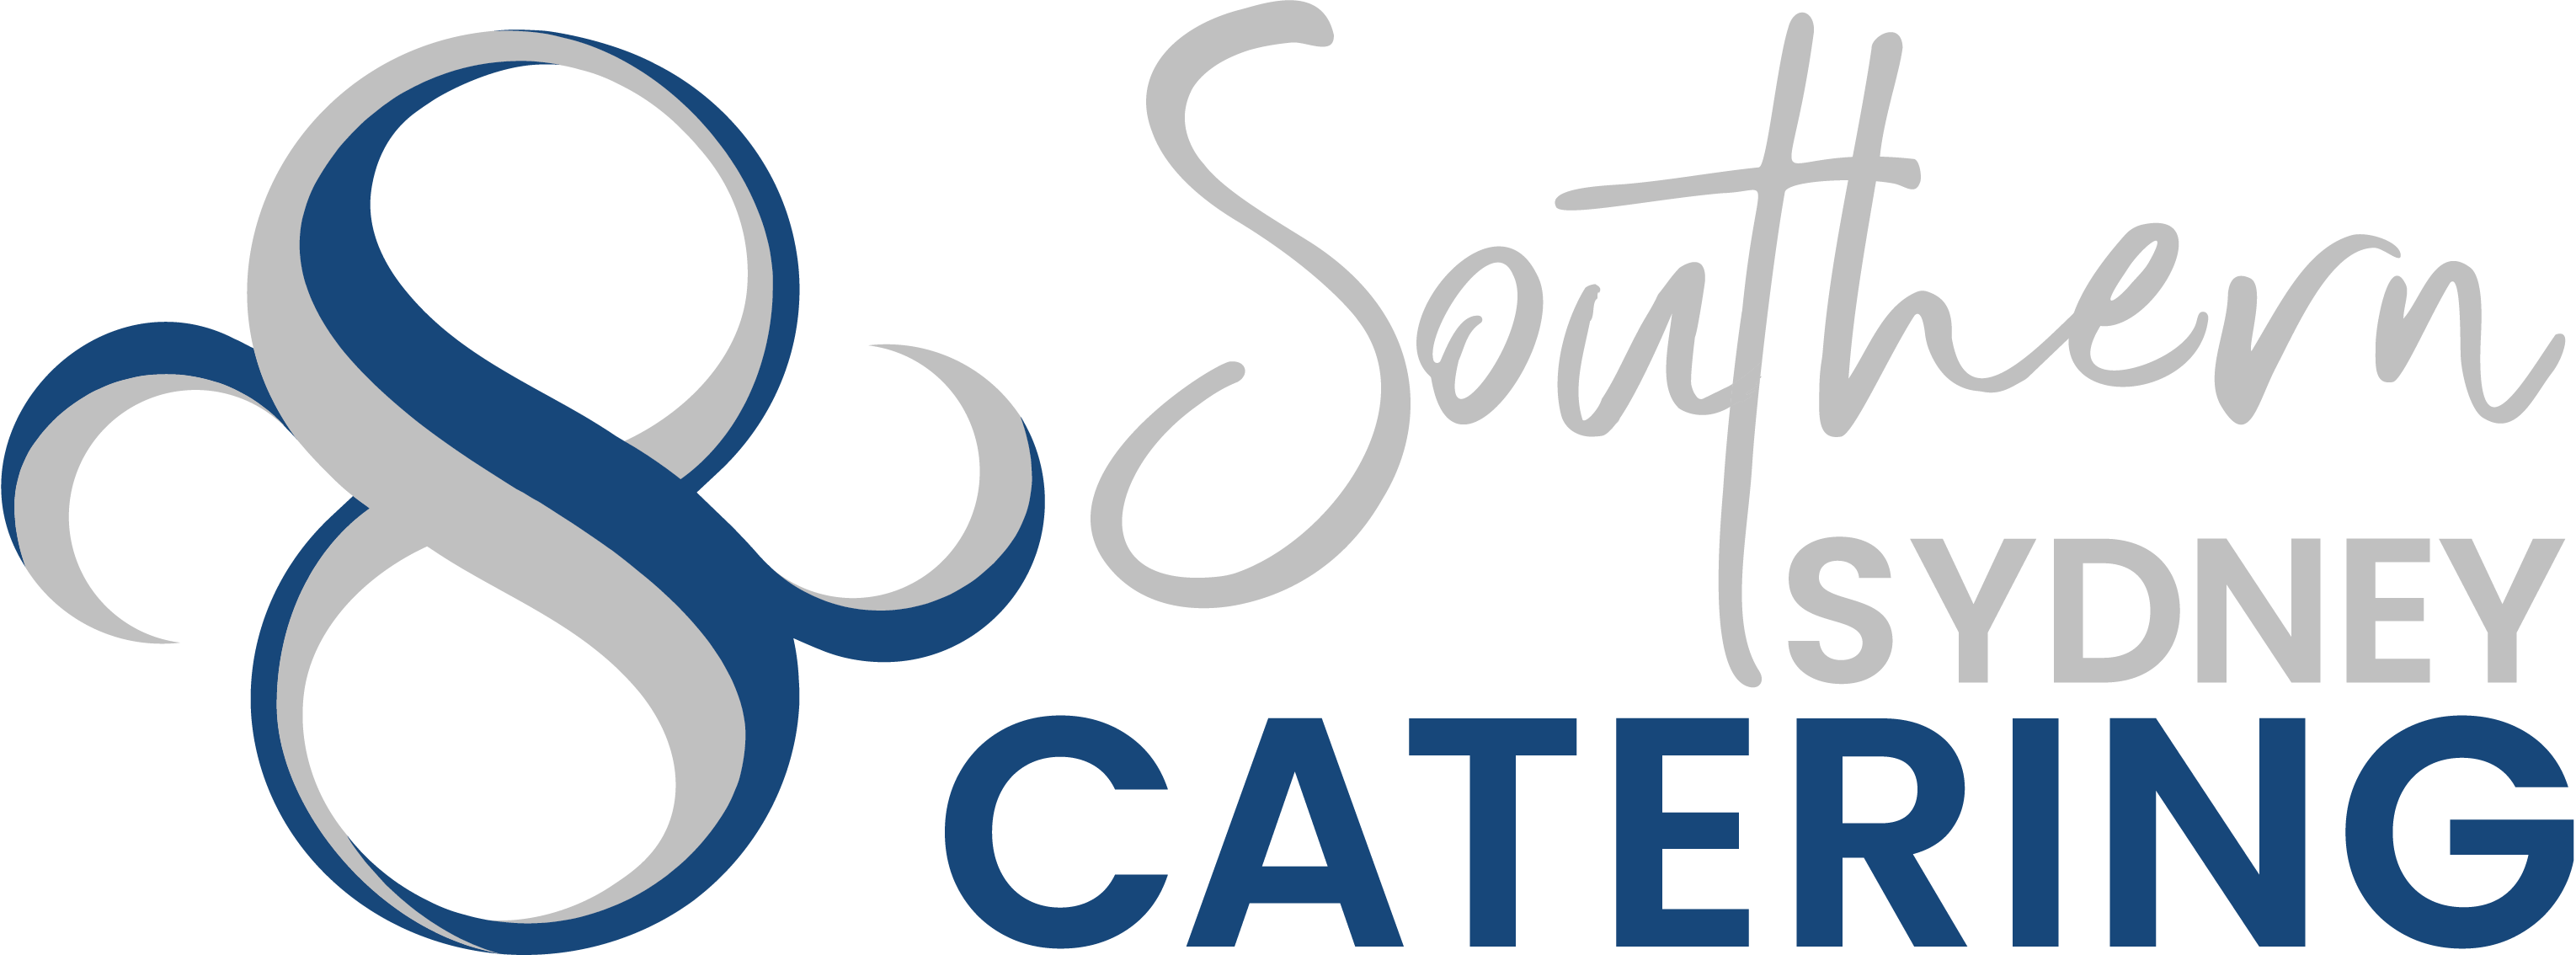 Southern Sydney Catering